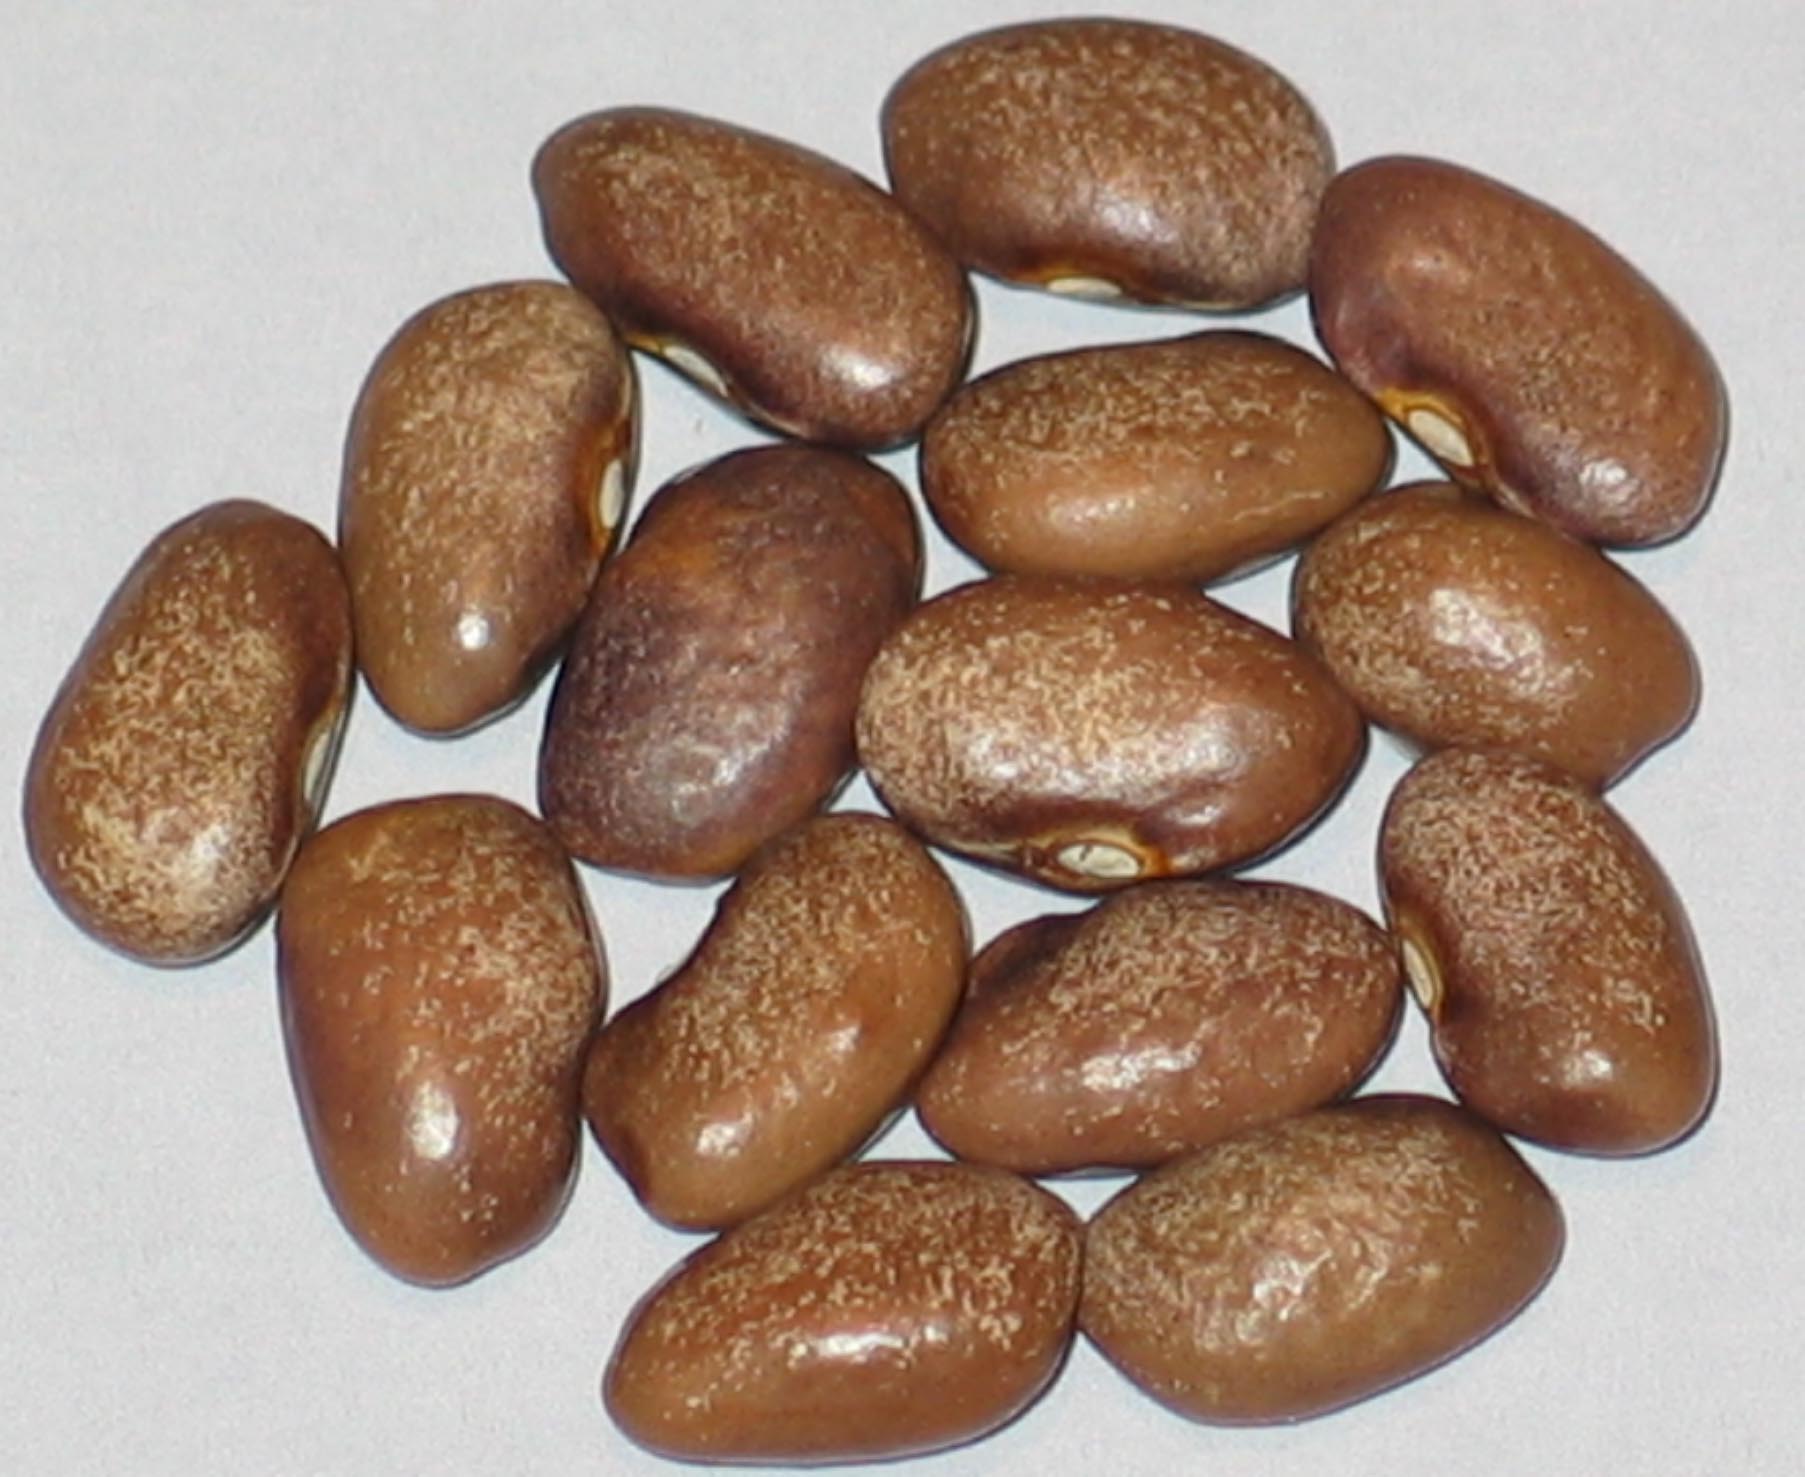 image of Indian Mound beans